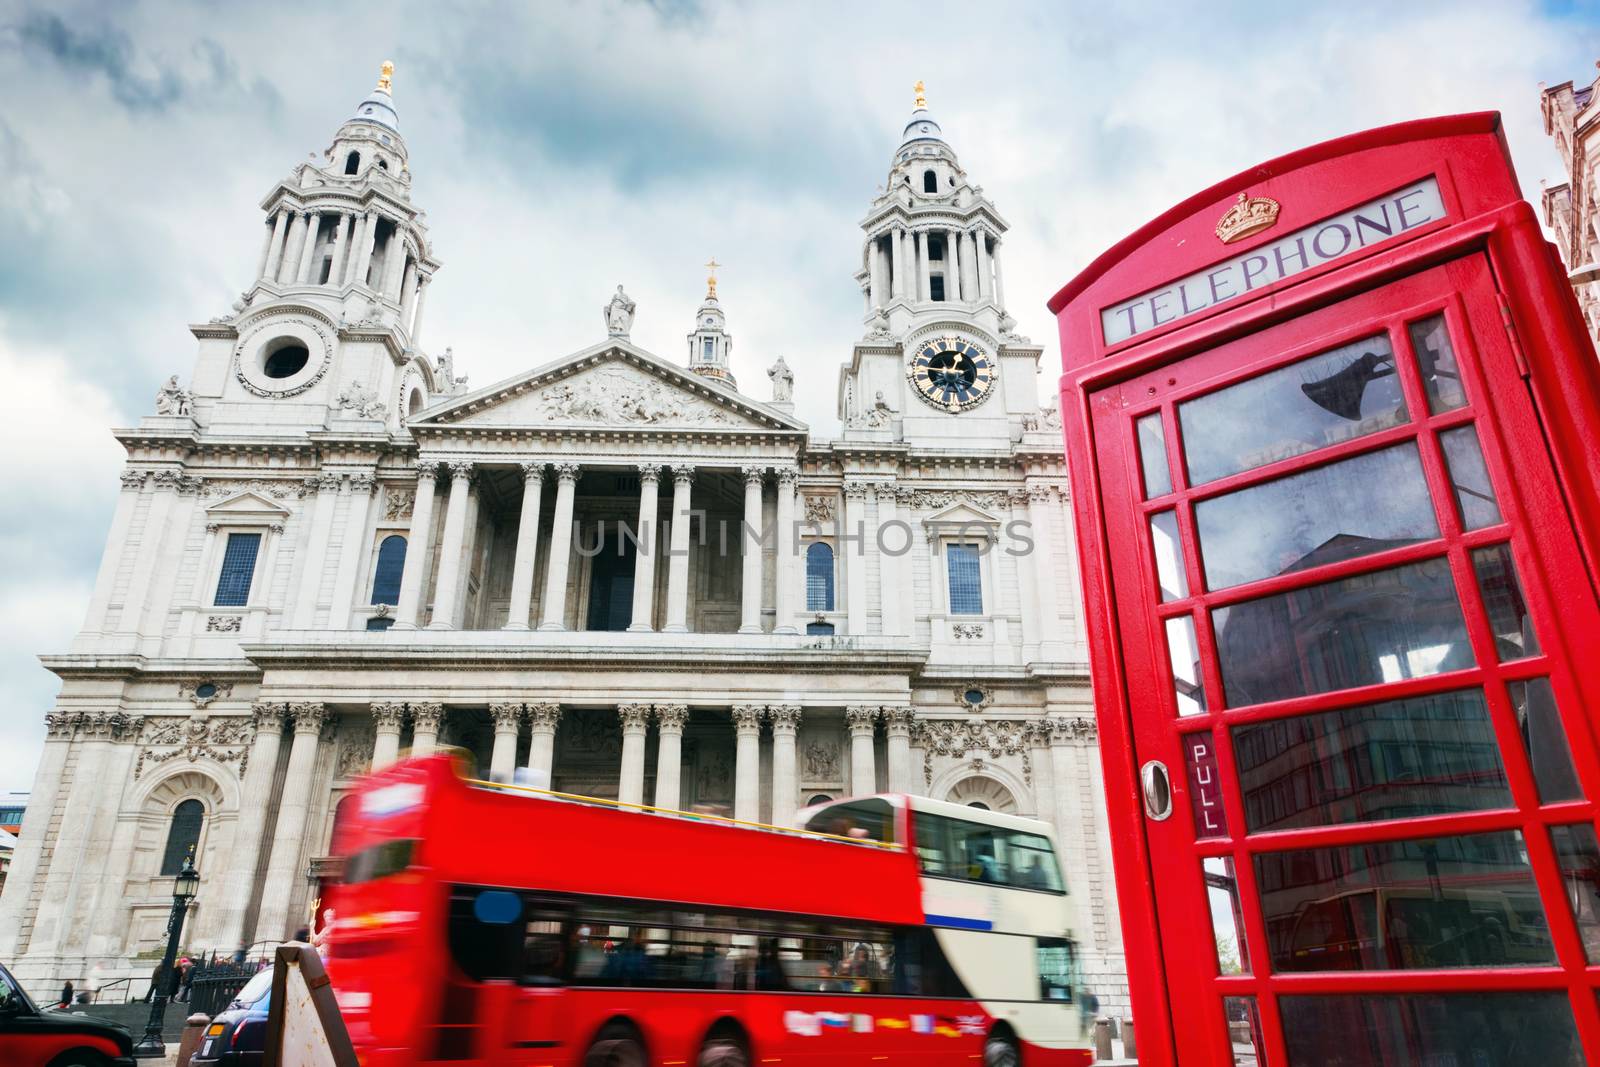 St Paul's Cathedral, red bus, telephone booth. Symbols of London, UK. by photocreo